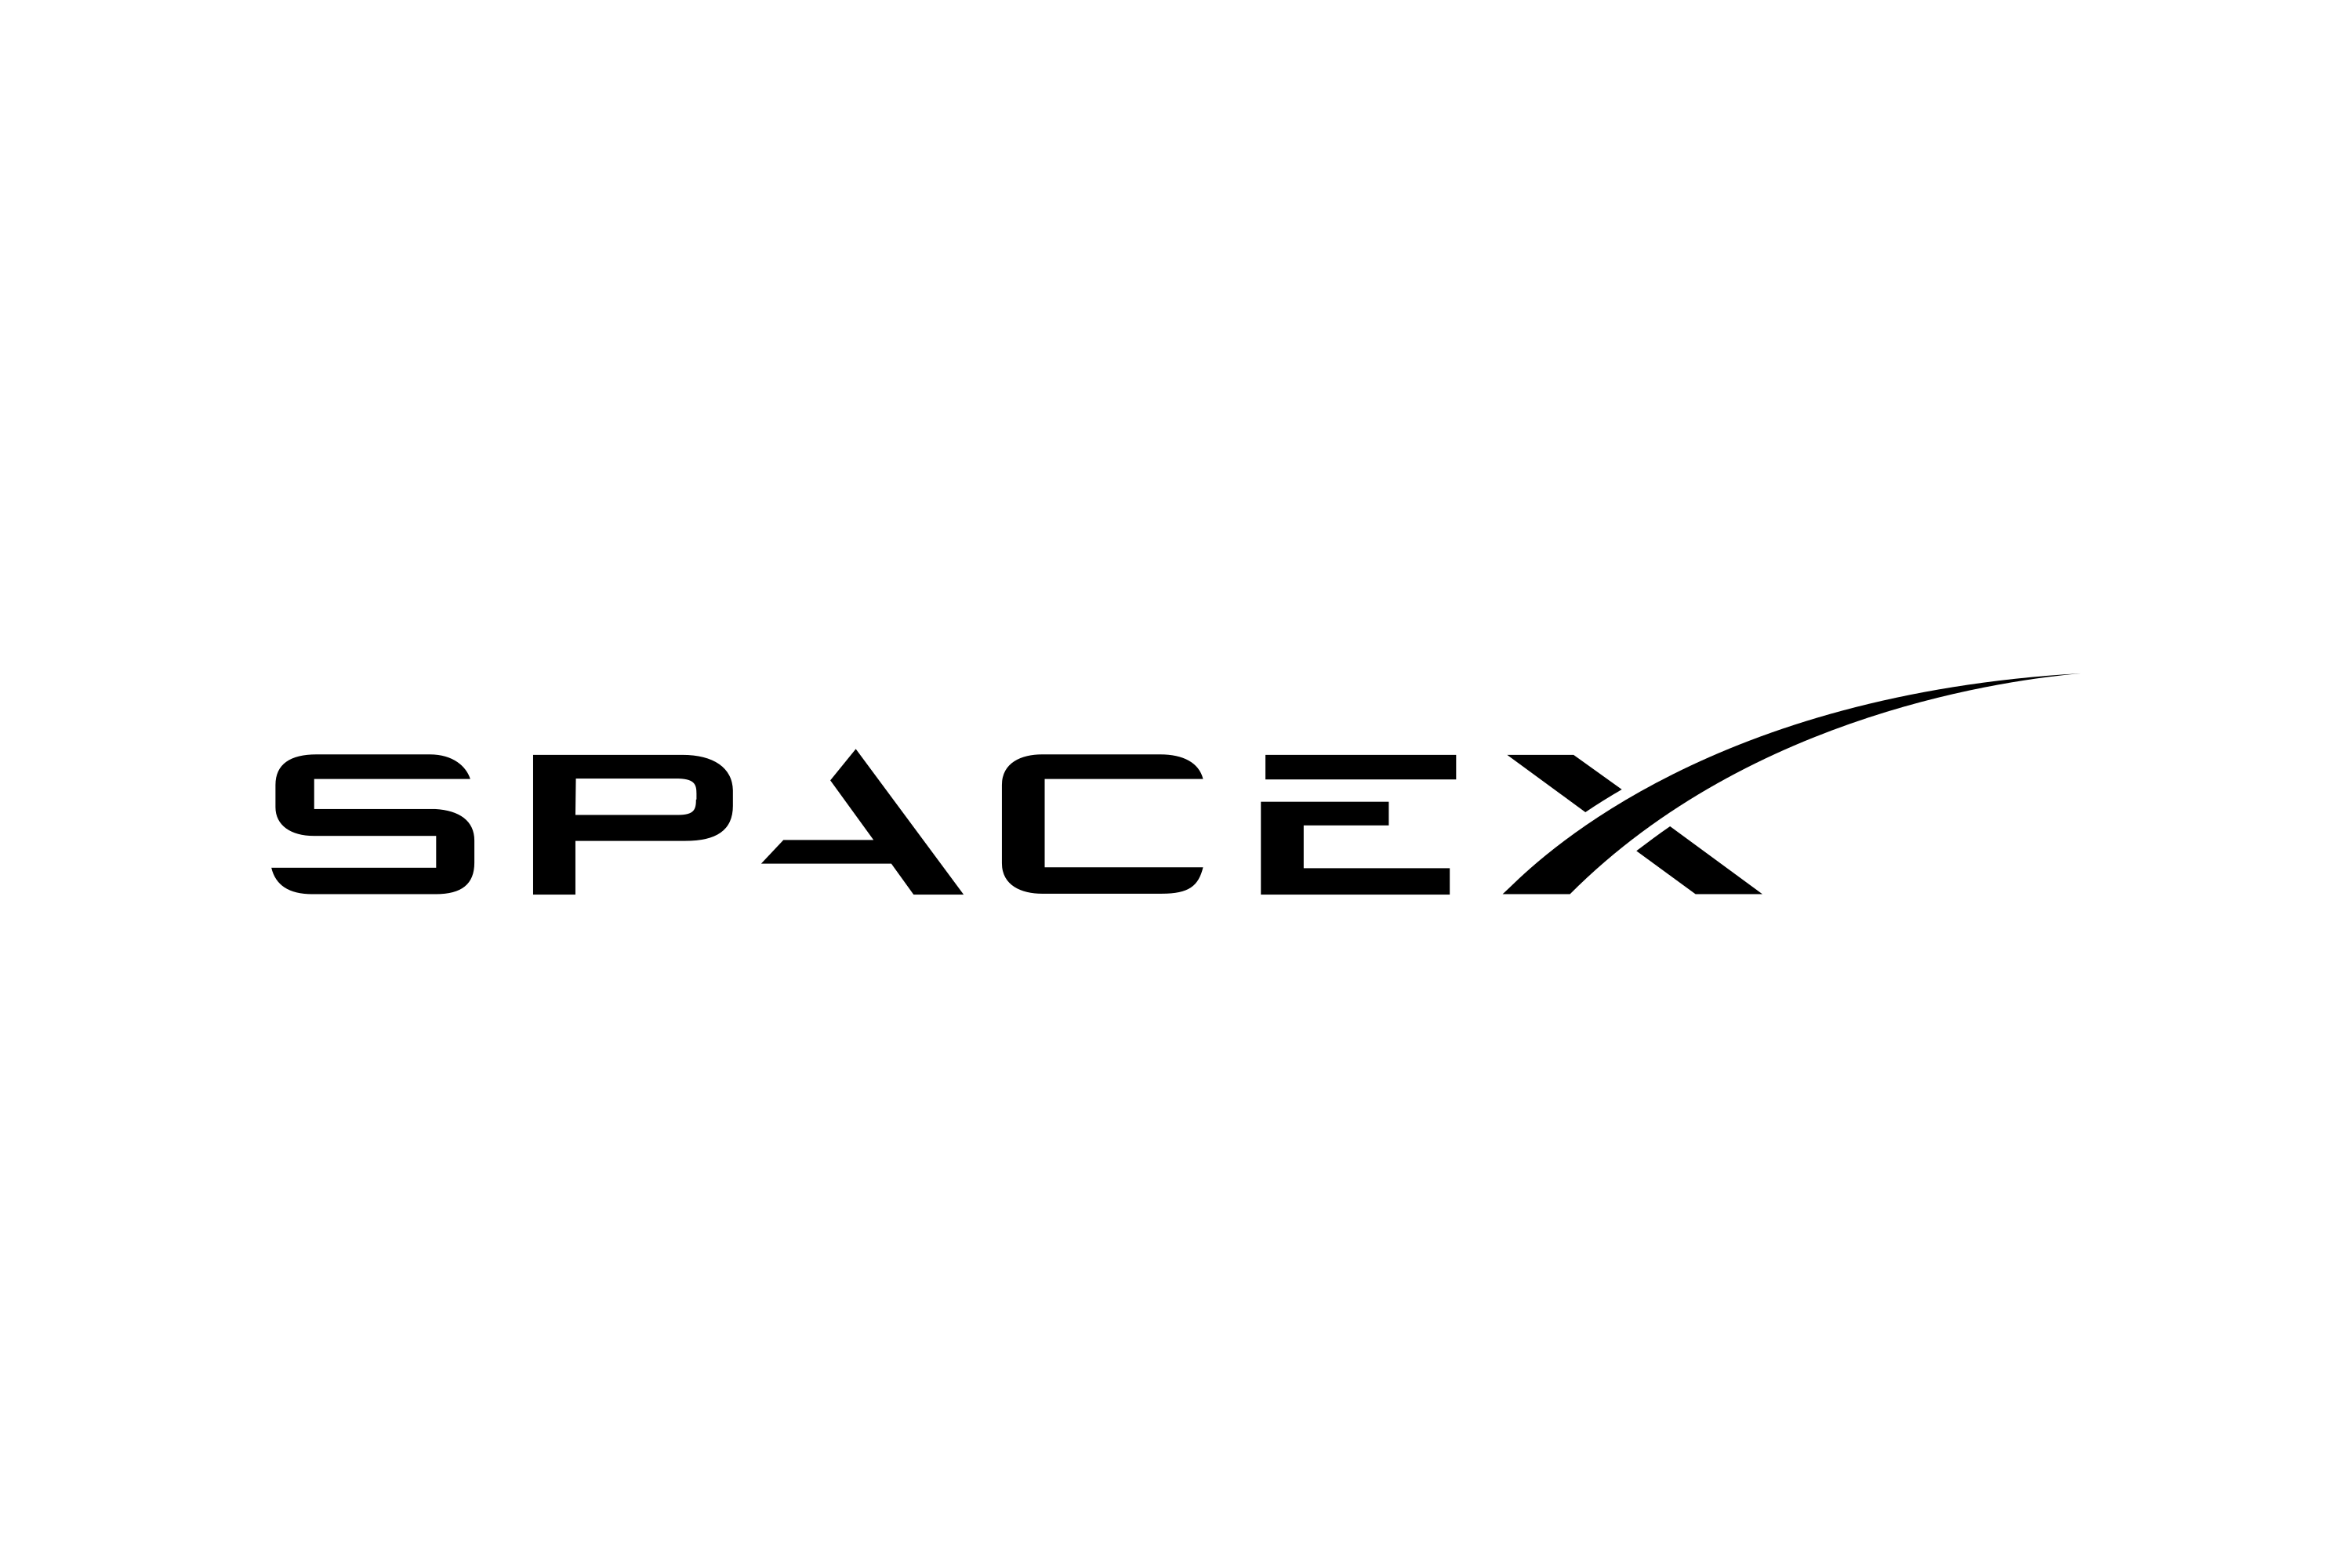 SpaceX Logo transparent PNG - StickPNG